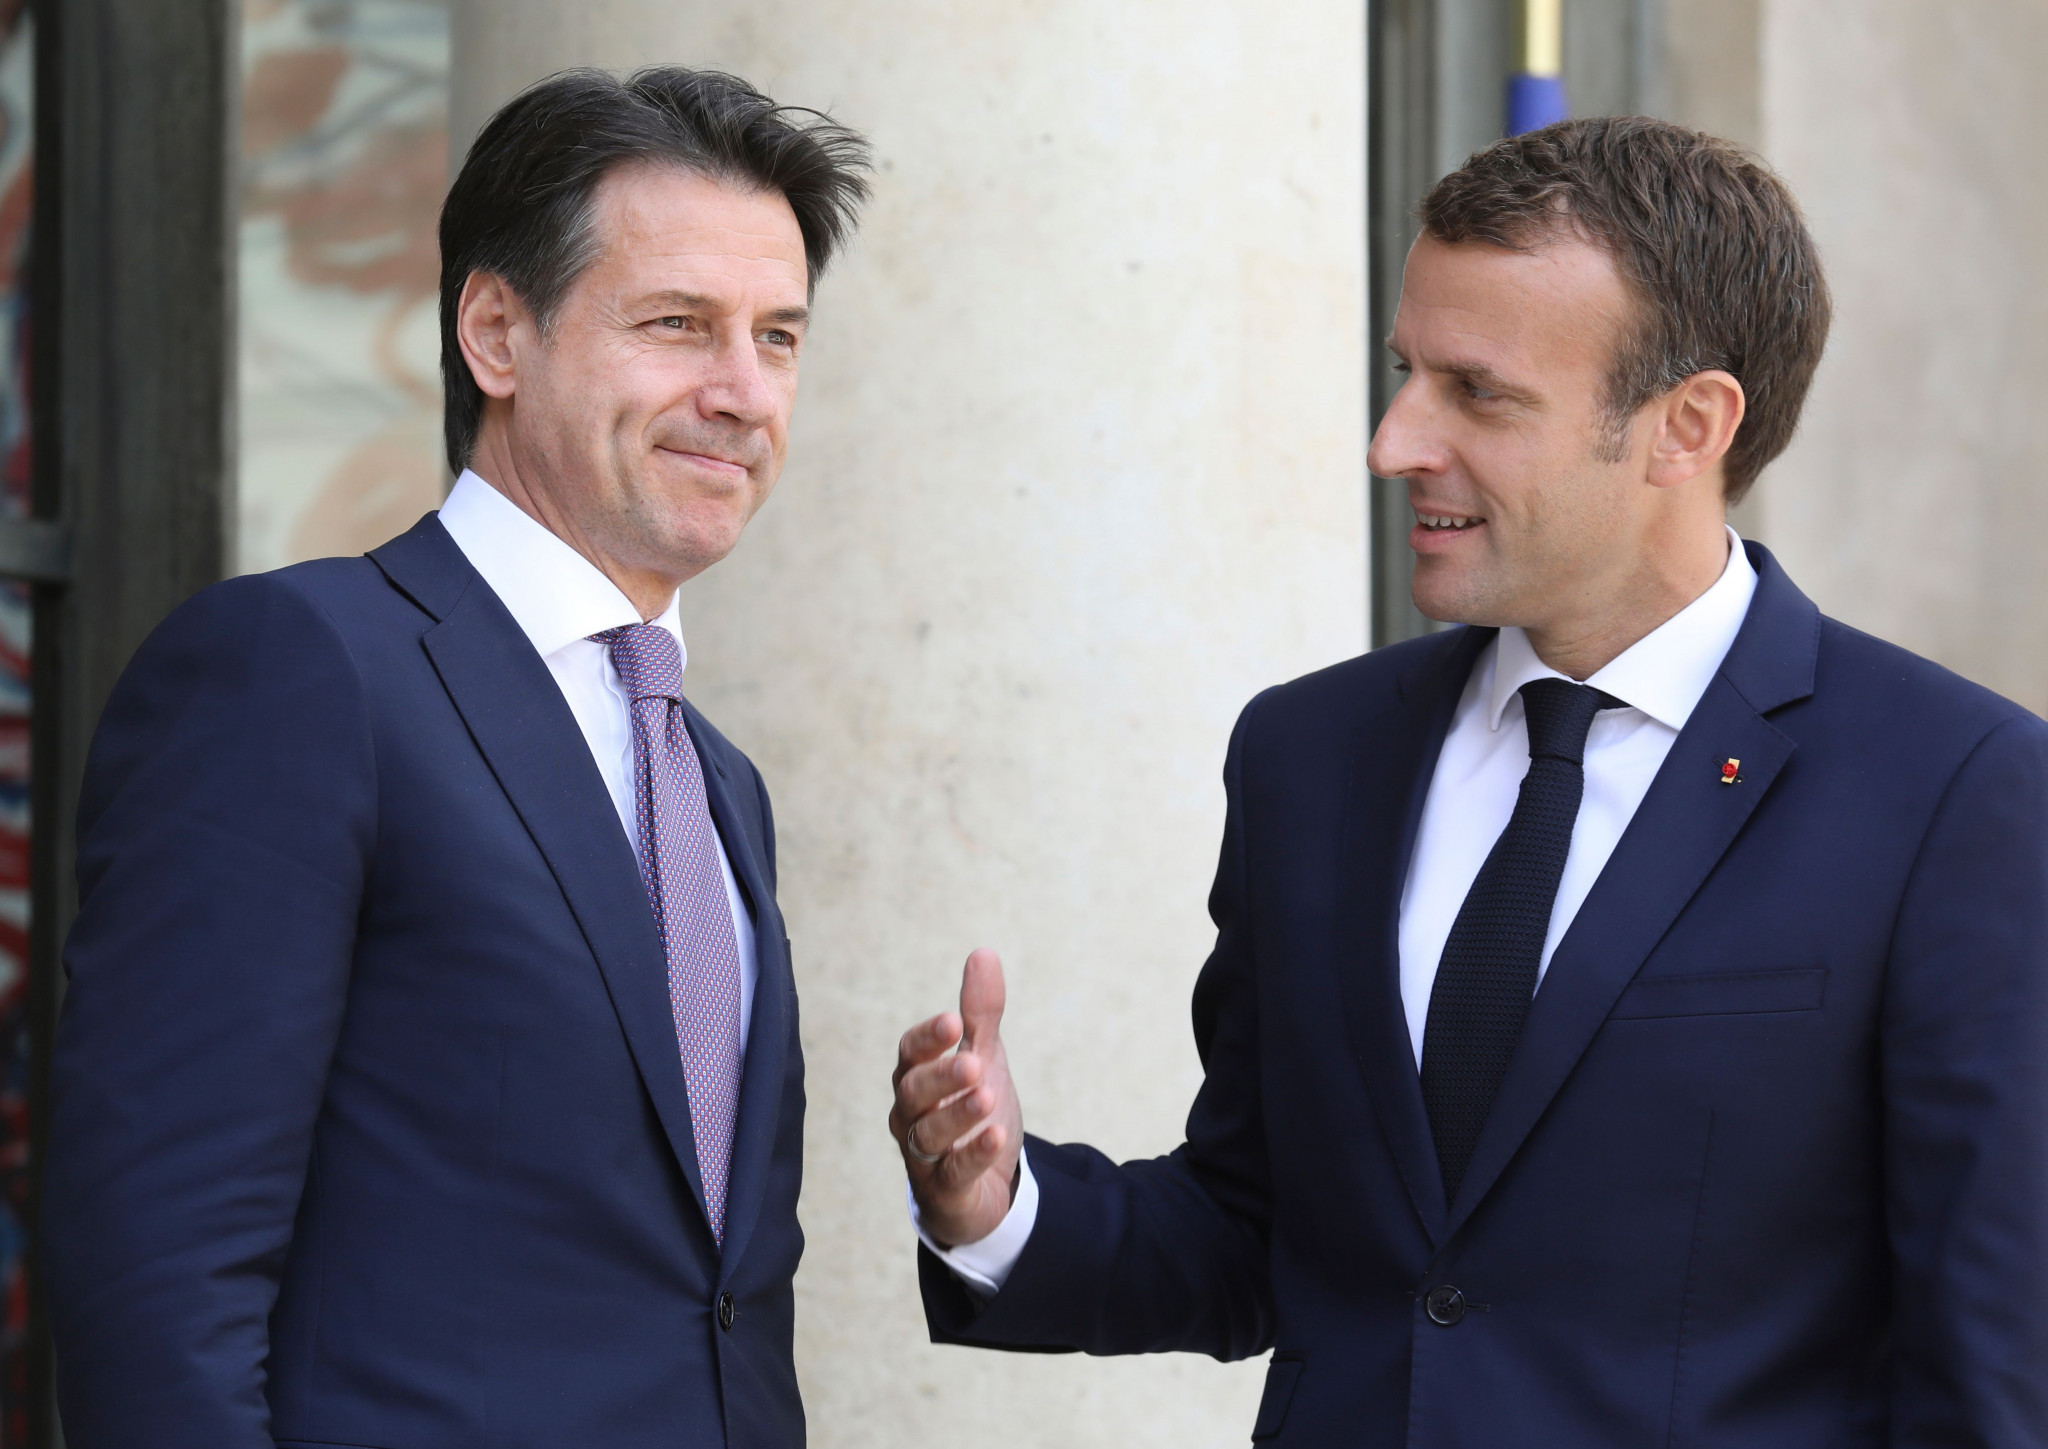 Giuseppe Conte, left, pictured with French President Emmanuel Macron today, has not yet publicly commented on the potential Winter Olympic bid ©Getty Images